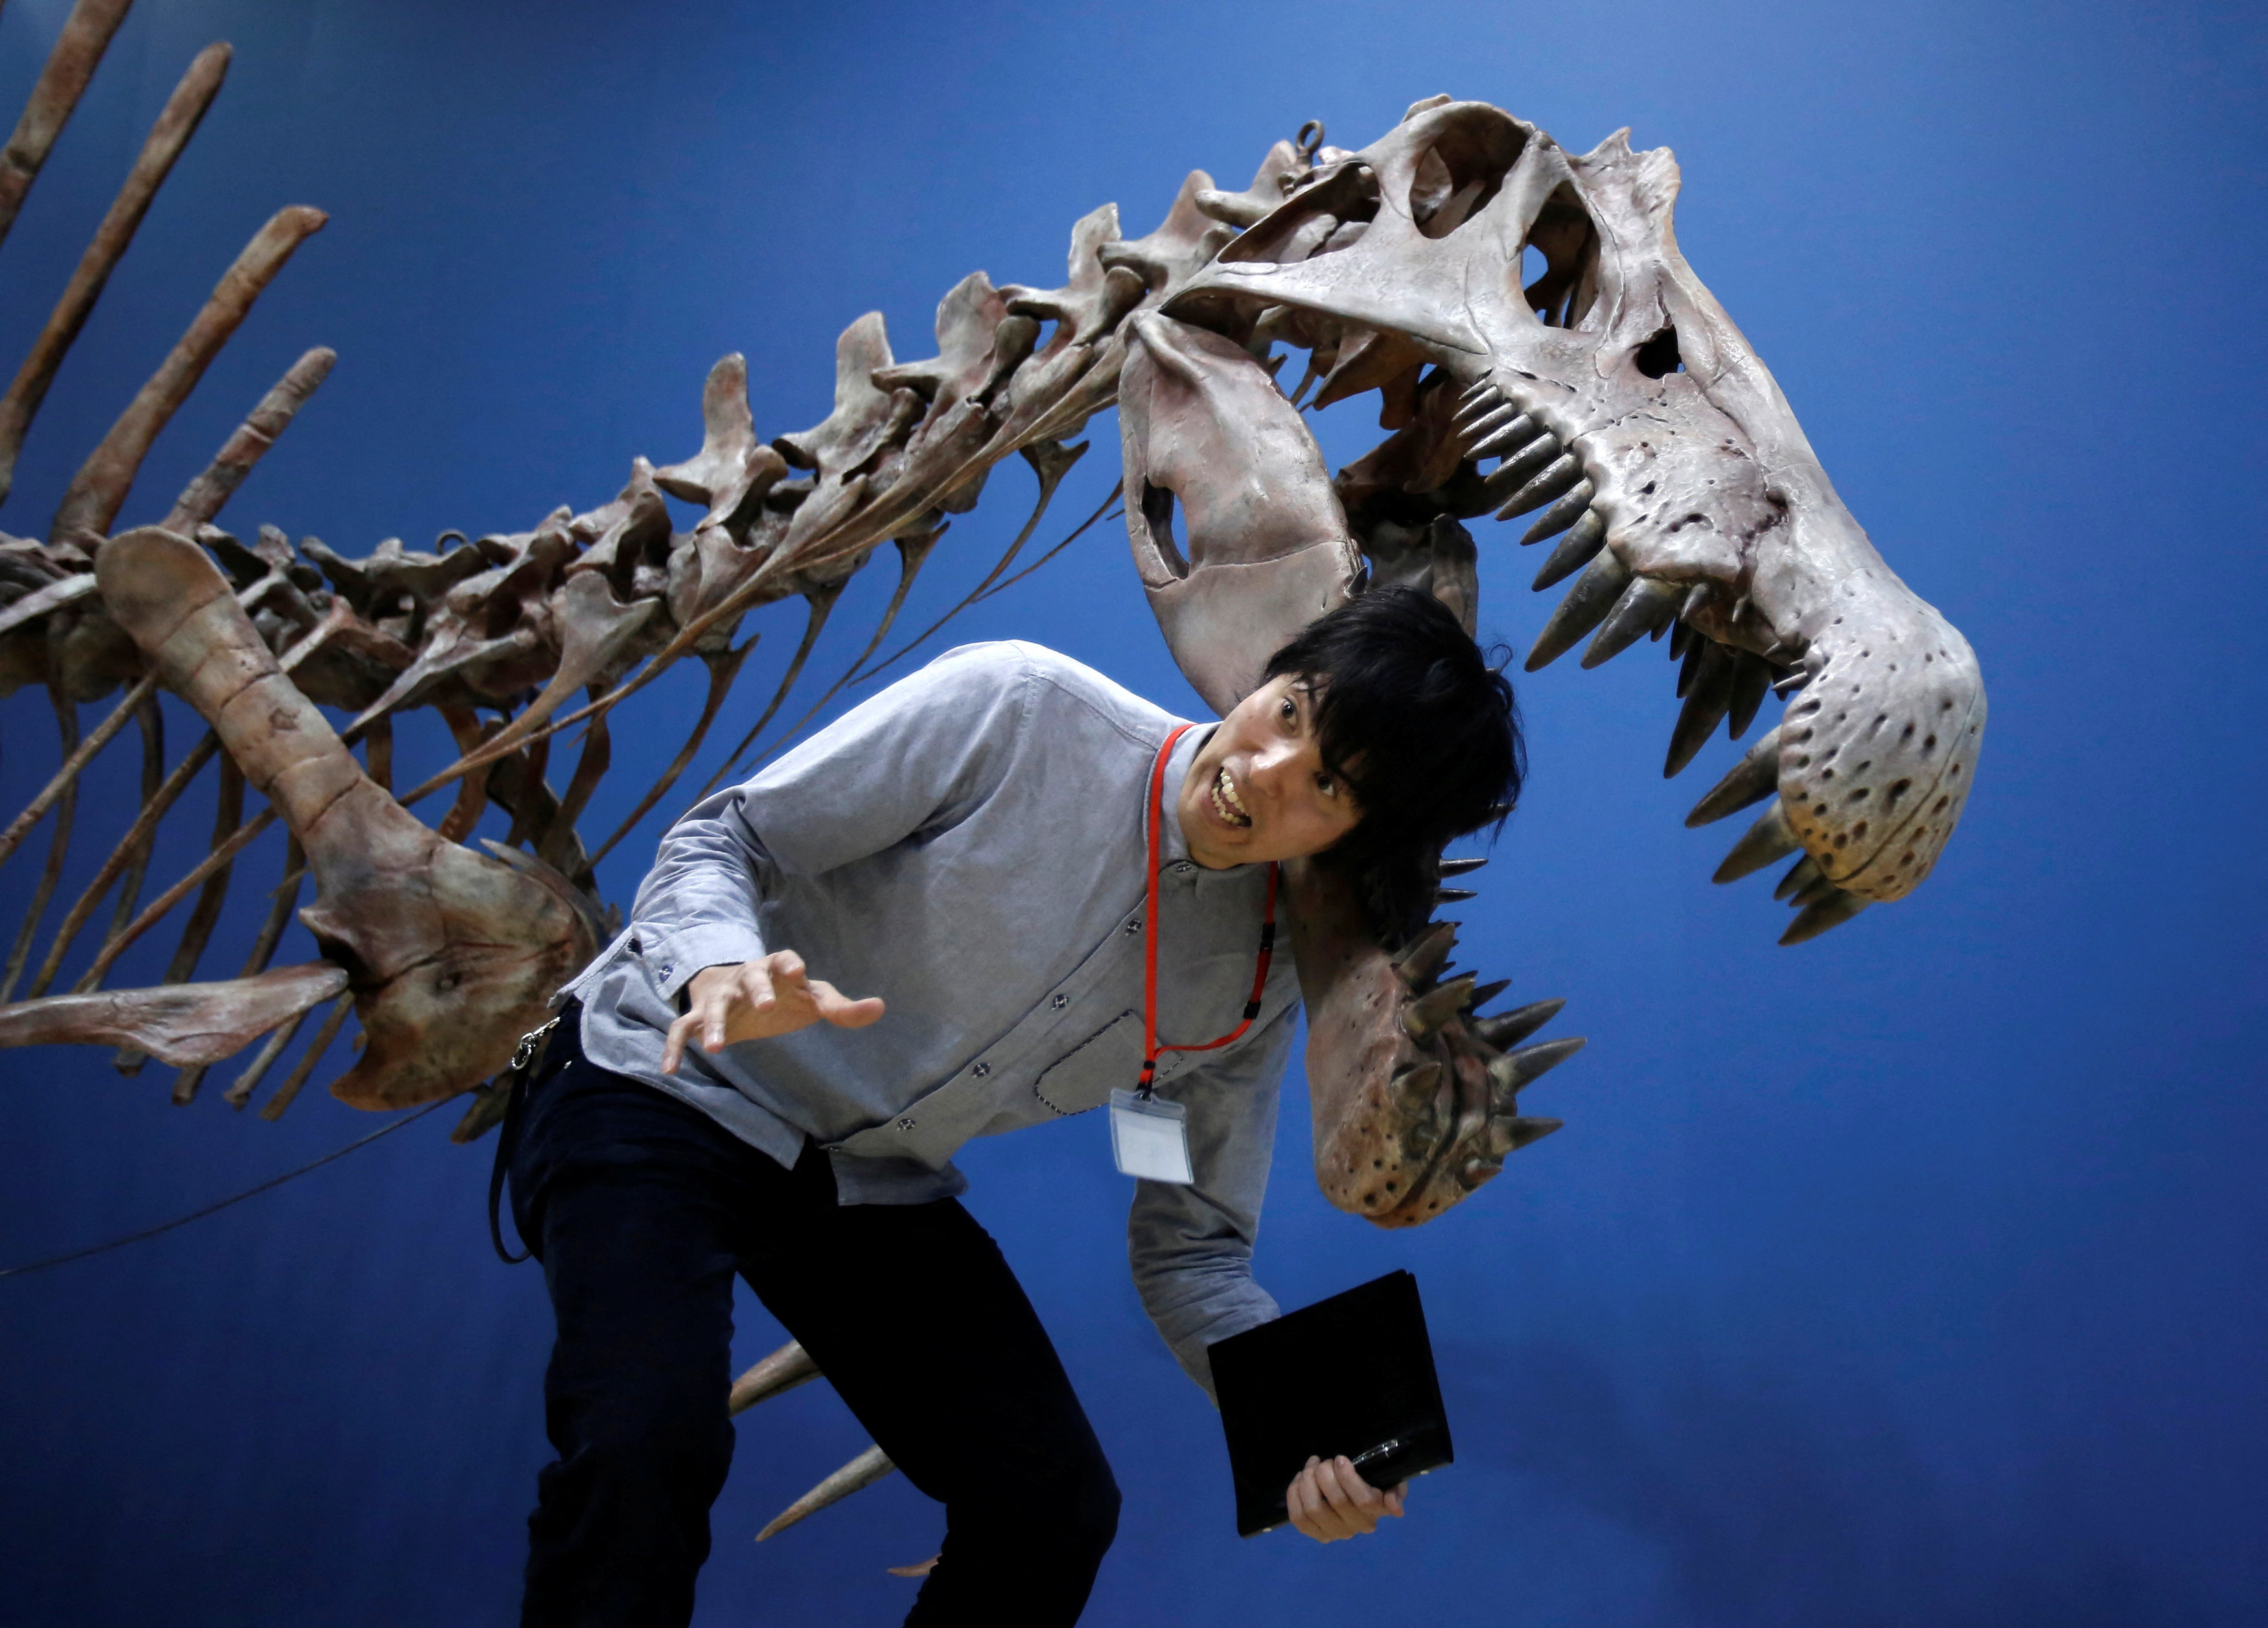 A reporter poses with a Spinosaurus's skeleton replica during a preparation and media preview for the Dinosaur EXPO at the National Museum of Nature and Science in Tokyo